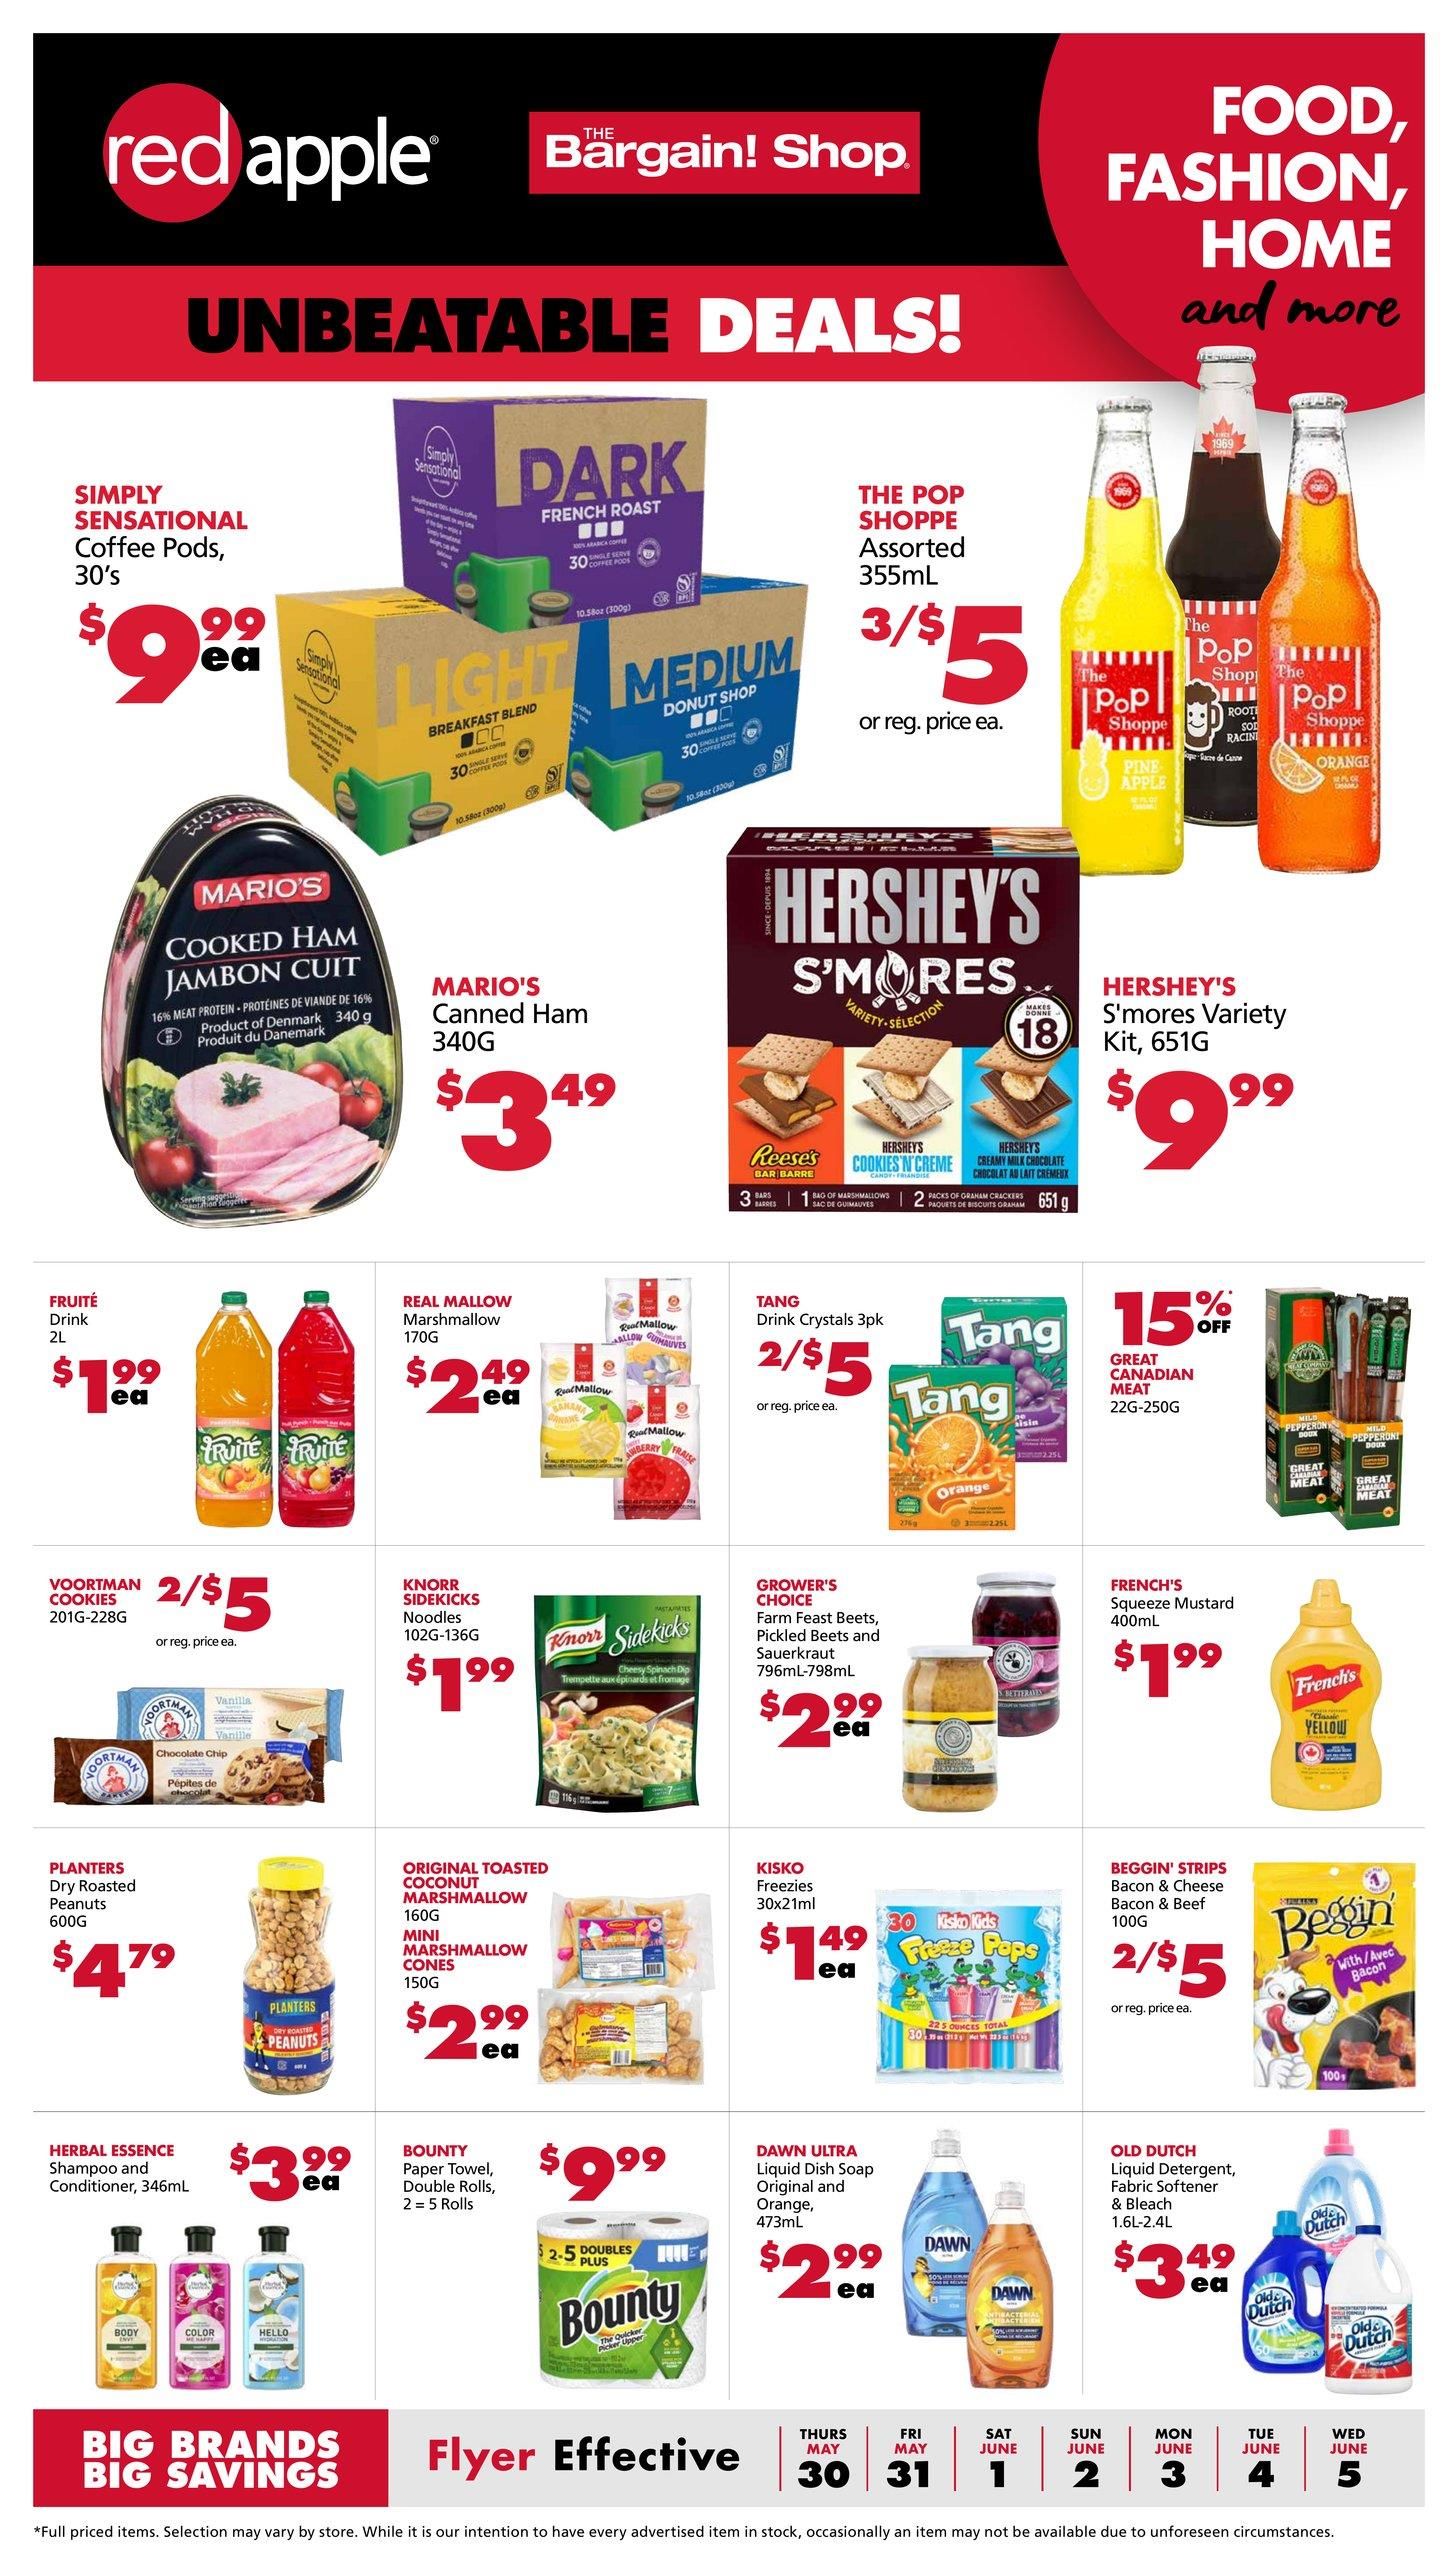 The Bargain Shop - Weekly Flyer Specials